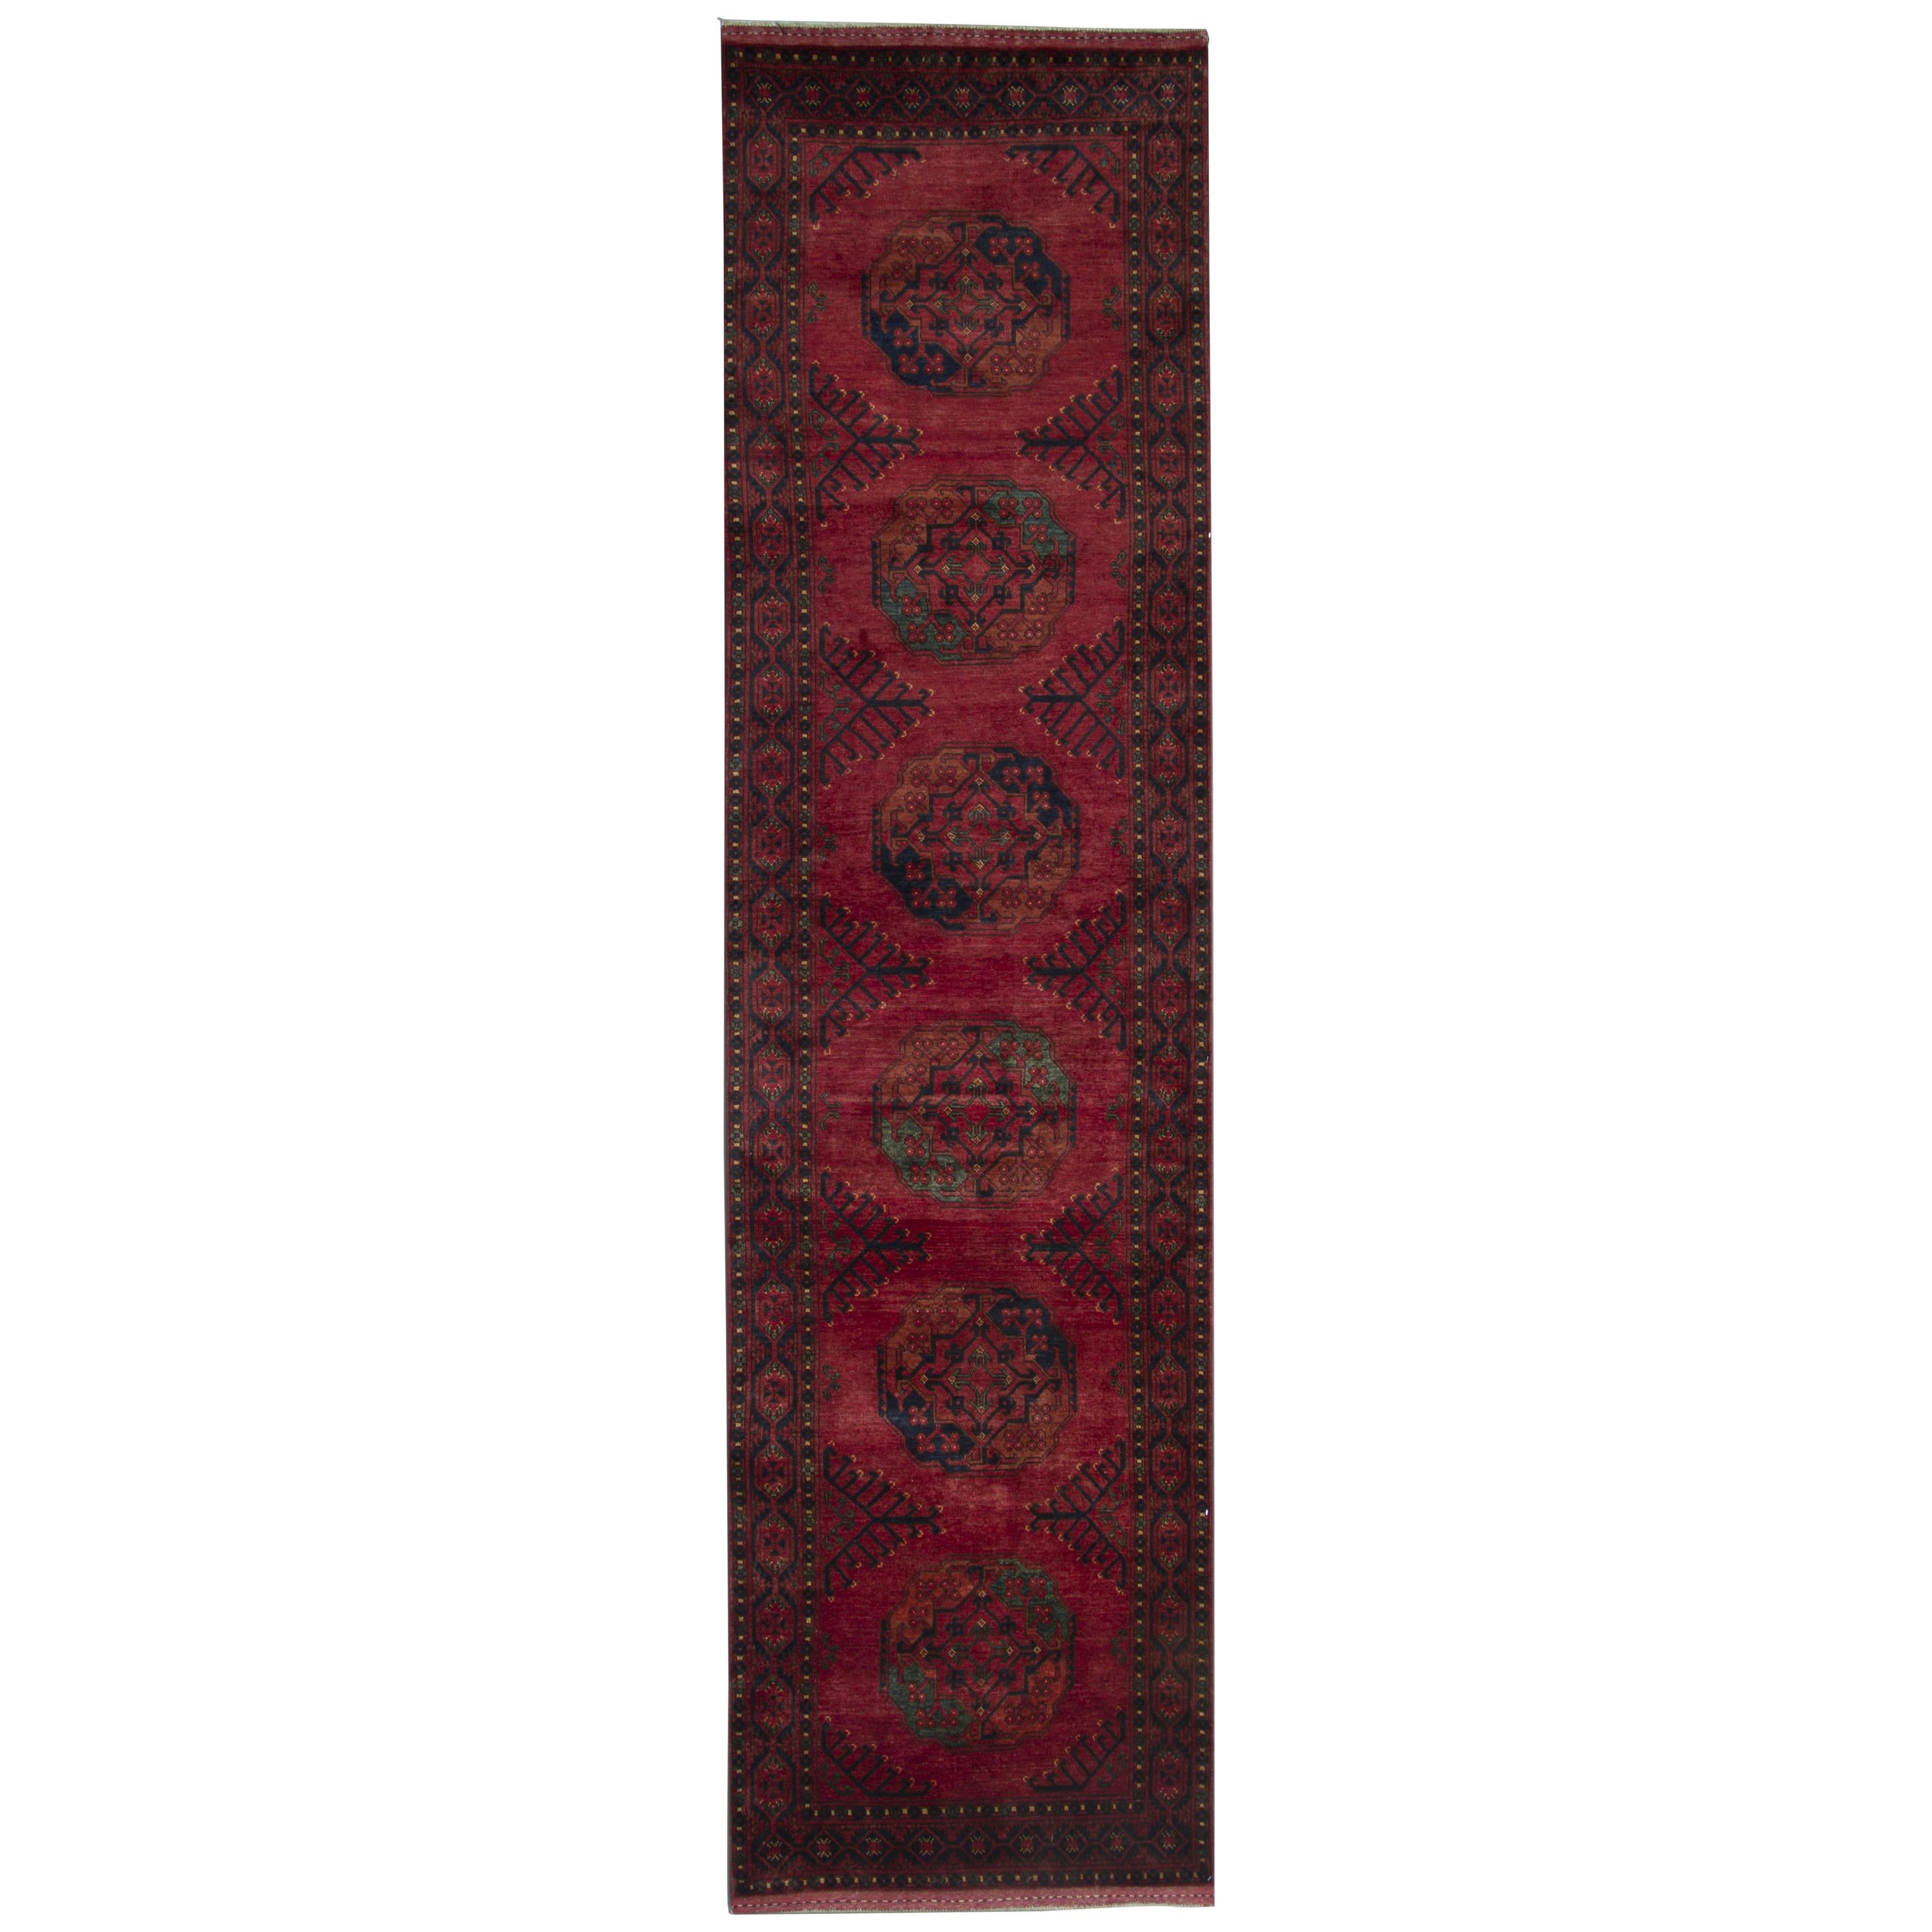 Traditional Runner Rug, Hand woven Oriental Red Wool Rugs for Sale